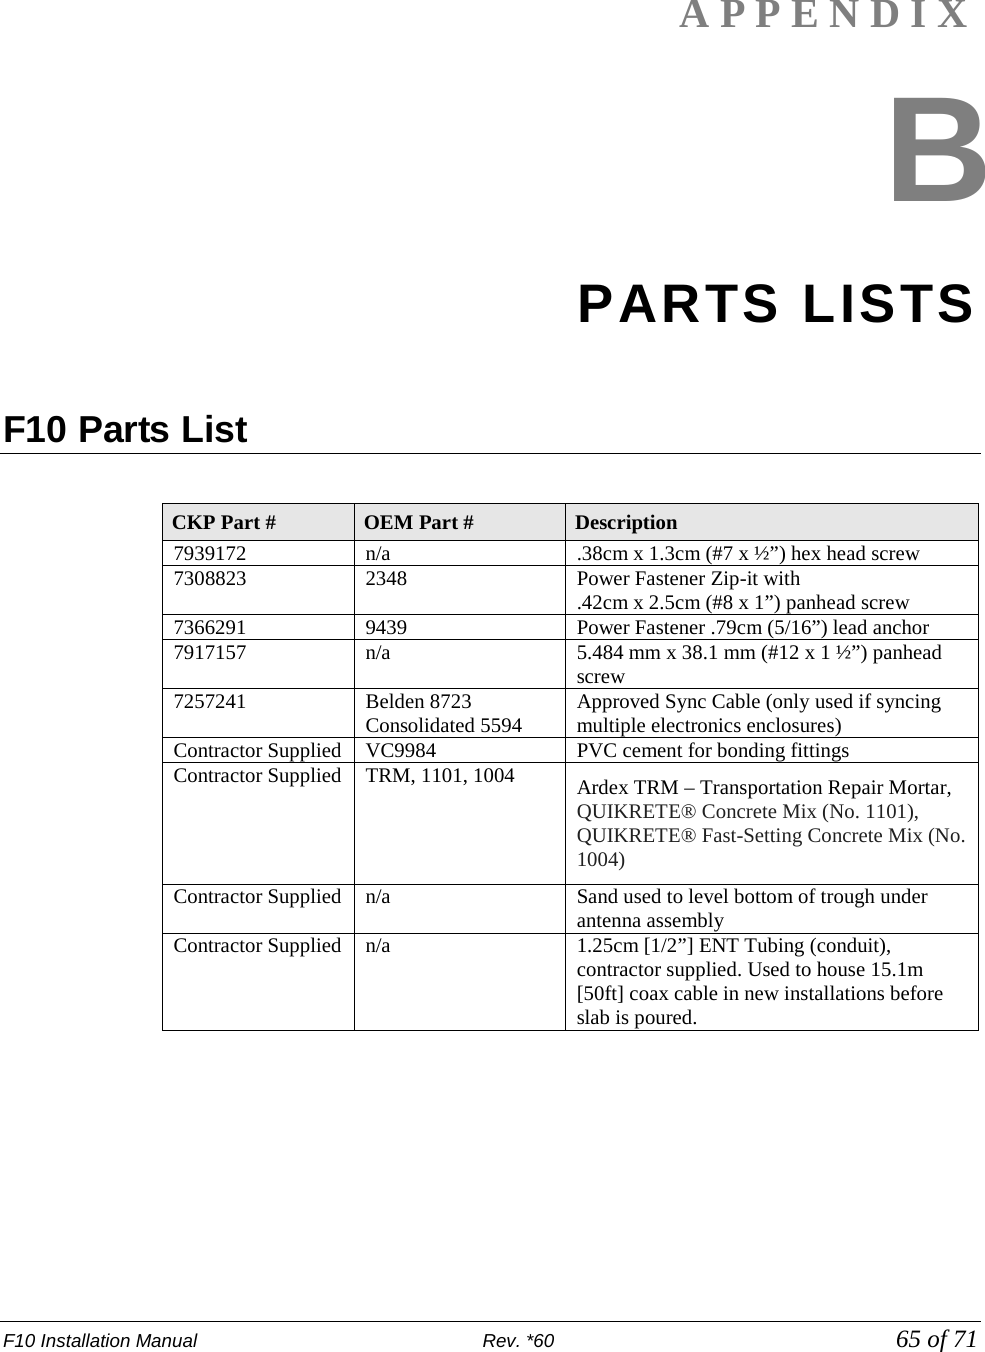 F10 Installation Manual                          Rev. *60            65 of 71  APPENDIX B PARTS LISTS  F10 Parts List  CKP Part # OEM Part # Description 7939172 n/a .38cm x 1.3cm (#7 x ½”) hex head screw 7308823 2348 Power Fastener Zip-it with  .42cm x 2.5cm (#8 x 1”) panhead screw 7366291 9439 Power Fastener .79cm (5/16”) lead anchor  7917157 n/a 5.484 mm x 38.1 mm (#12 x 1 ½”) panhead screw 7257241 Belden 8723 Consolidated 5594 Approved Sync Cable (only used if syncing multiple electronics enclosures) Contractor Supplied VC9984 PVC cement for bonding fittings  Contractor Supplied TRM, 1101, 1004 Ardex TRM – Transportation Repair Mortar, QUIKRETE® Concrete Mix (No. 1101), QUIKRETE® Fast-Setting Concrete Mix (No. 1004) Contractor Supplied n/a Sand used to level bottom of trough under antenna assembly Contractor Supplied n/a 1.25cm [1/2”] ENT Tubing (conduit), contractor supplied. Used to house 15.1m [50ft] coax cable in new installations before slab is poured.        